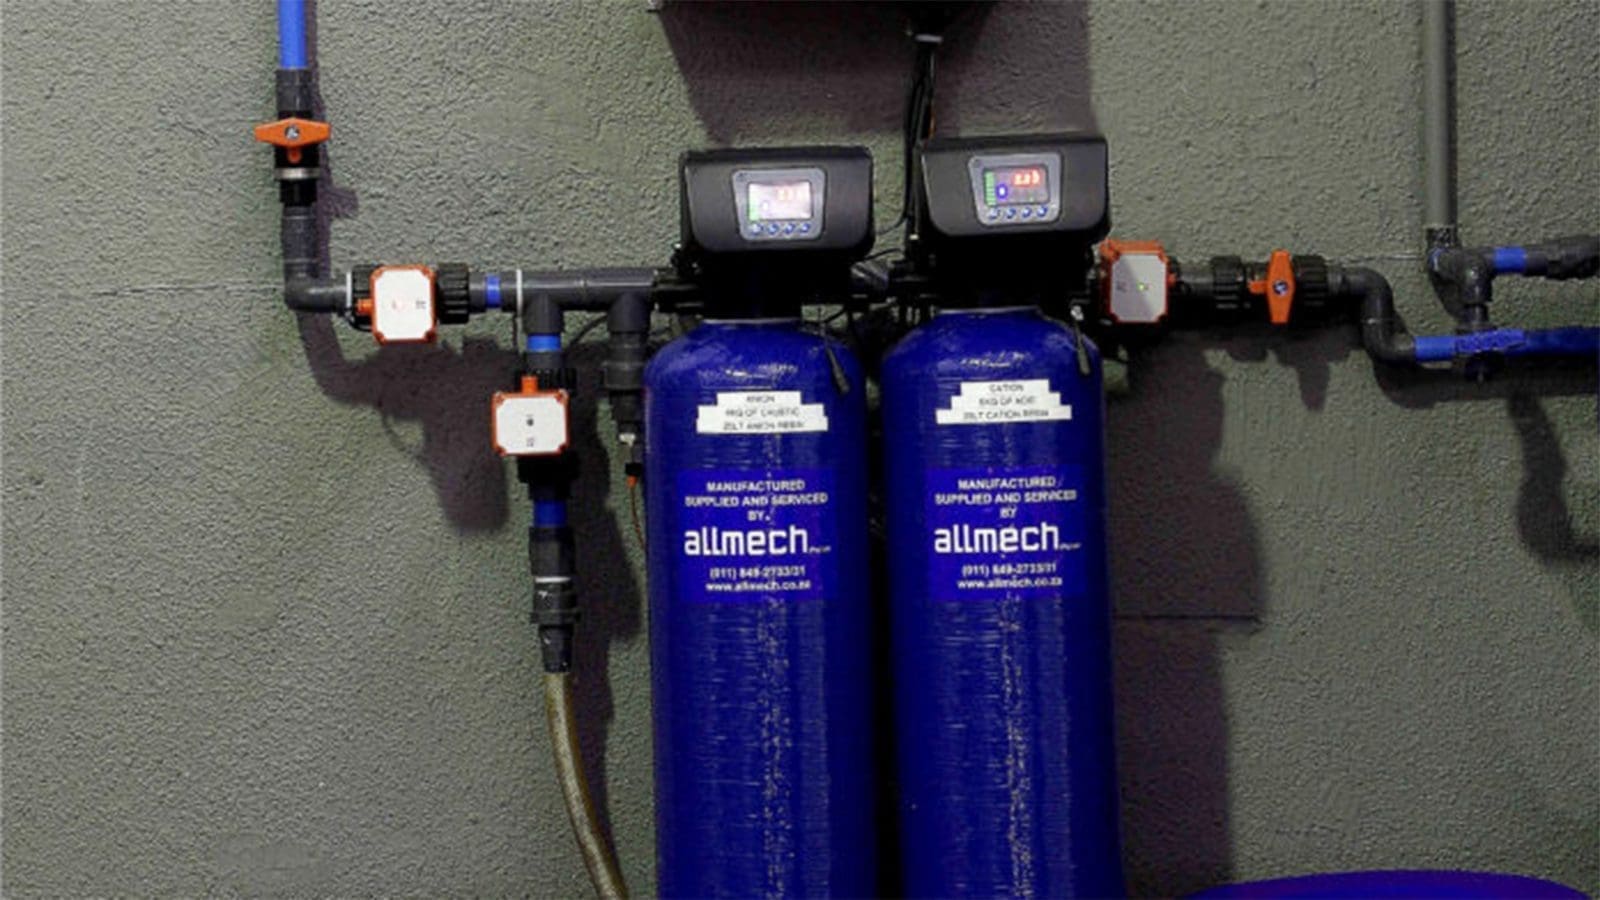 Allmech’s new PLC system shows promise in water purification